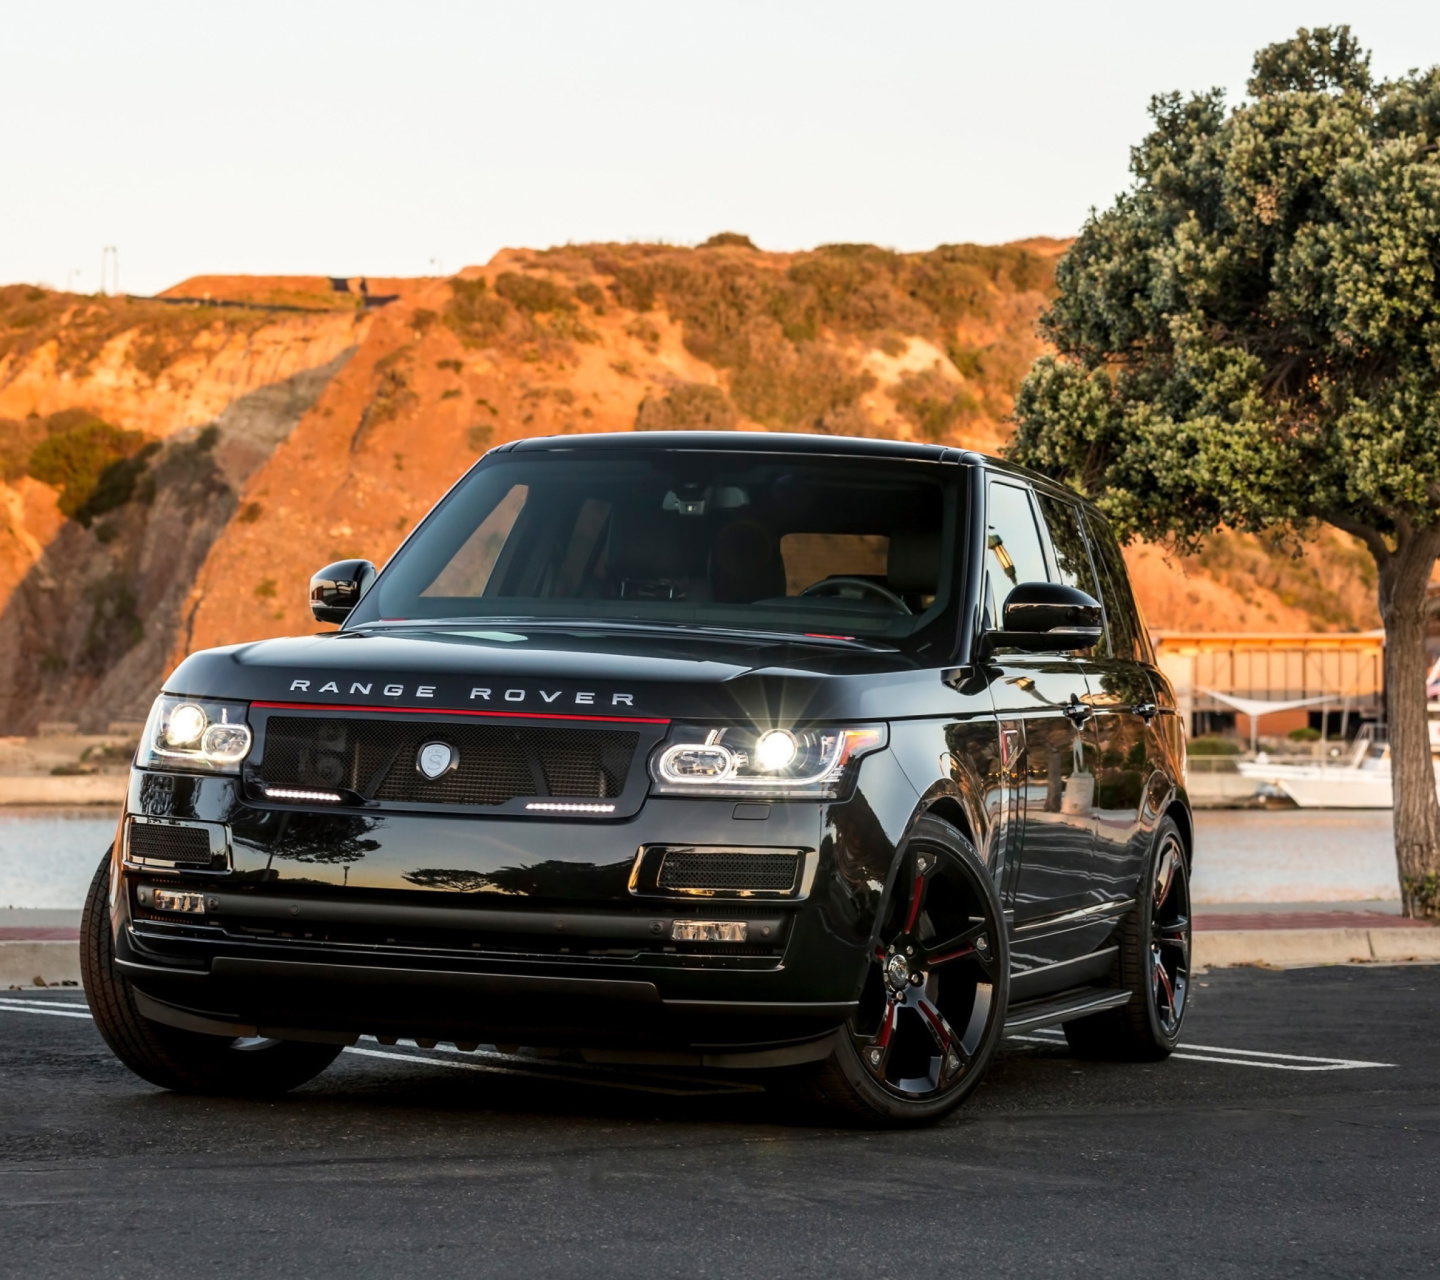 Das Range Rover STRUT with Grille Package Wallpaper 1440x1280